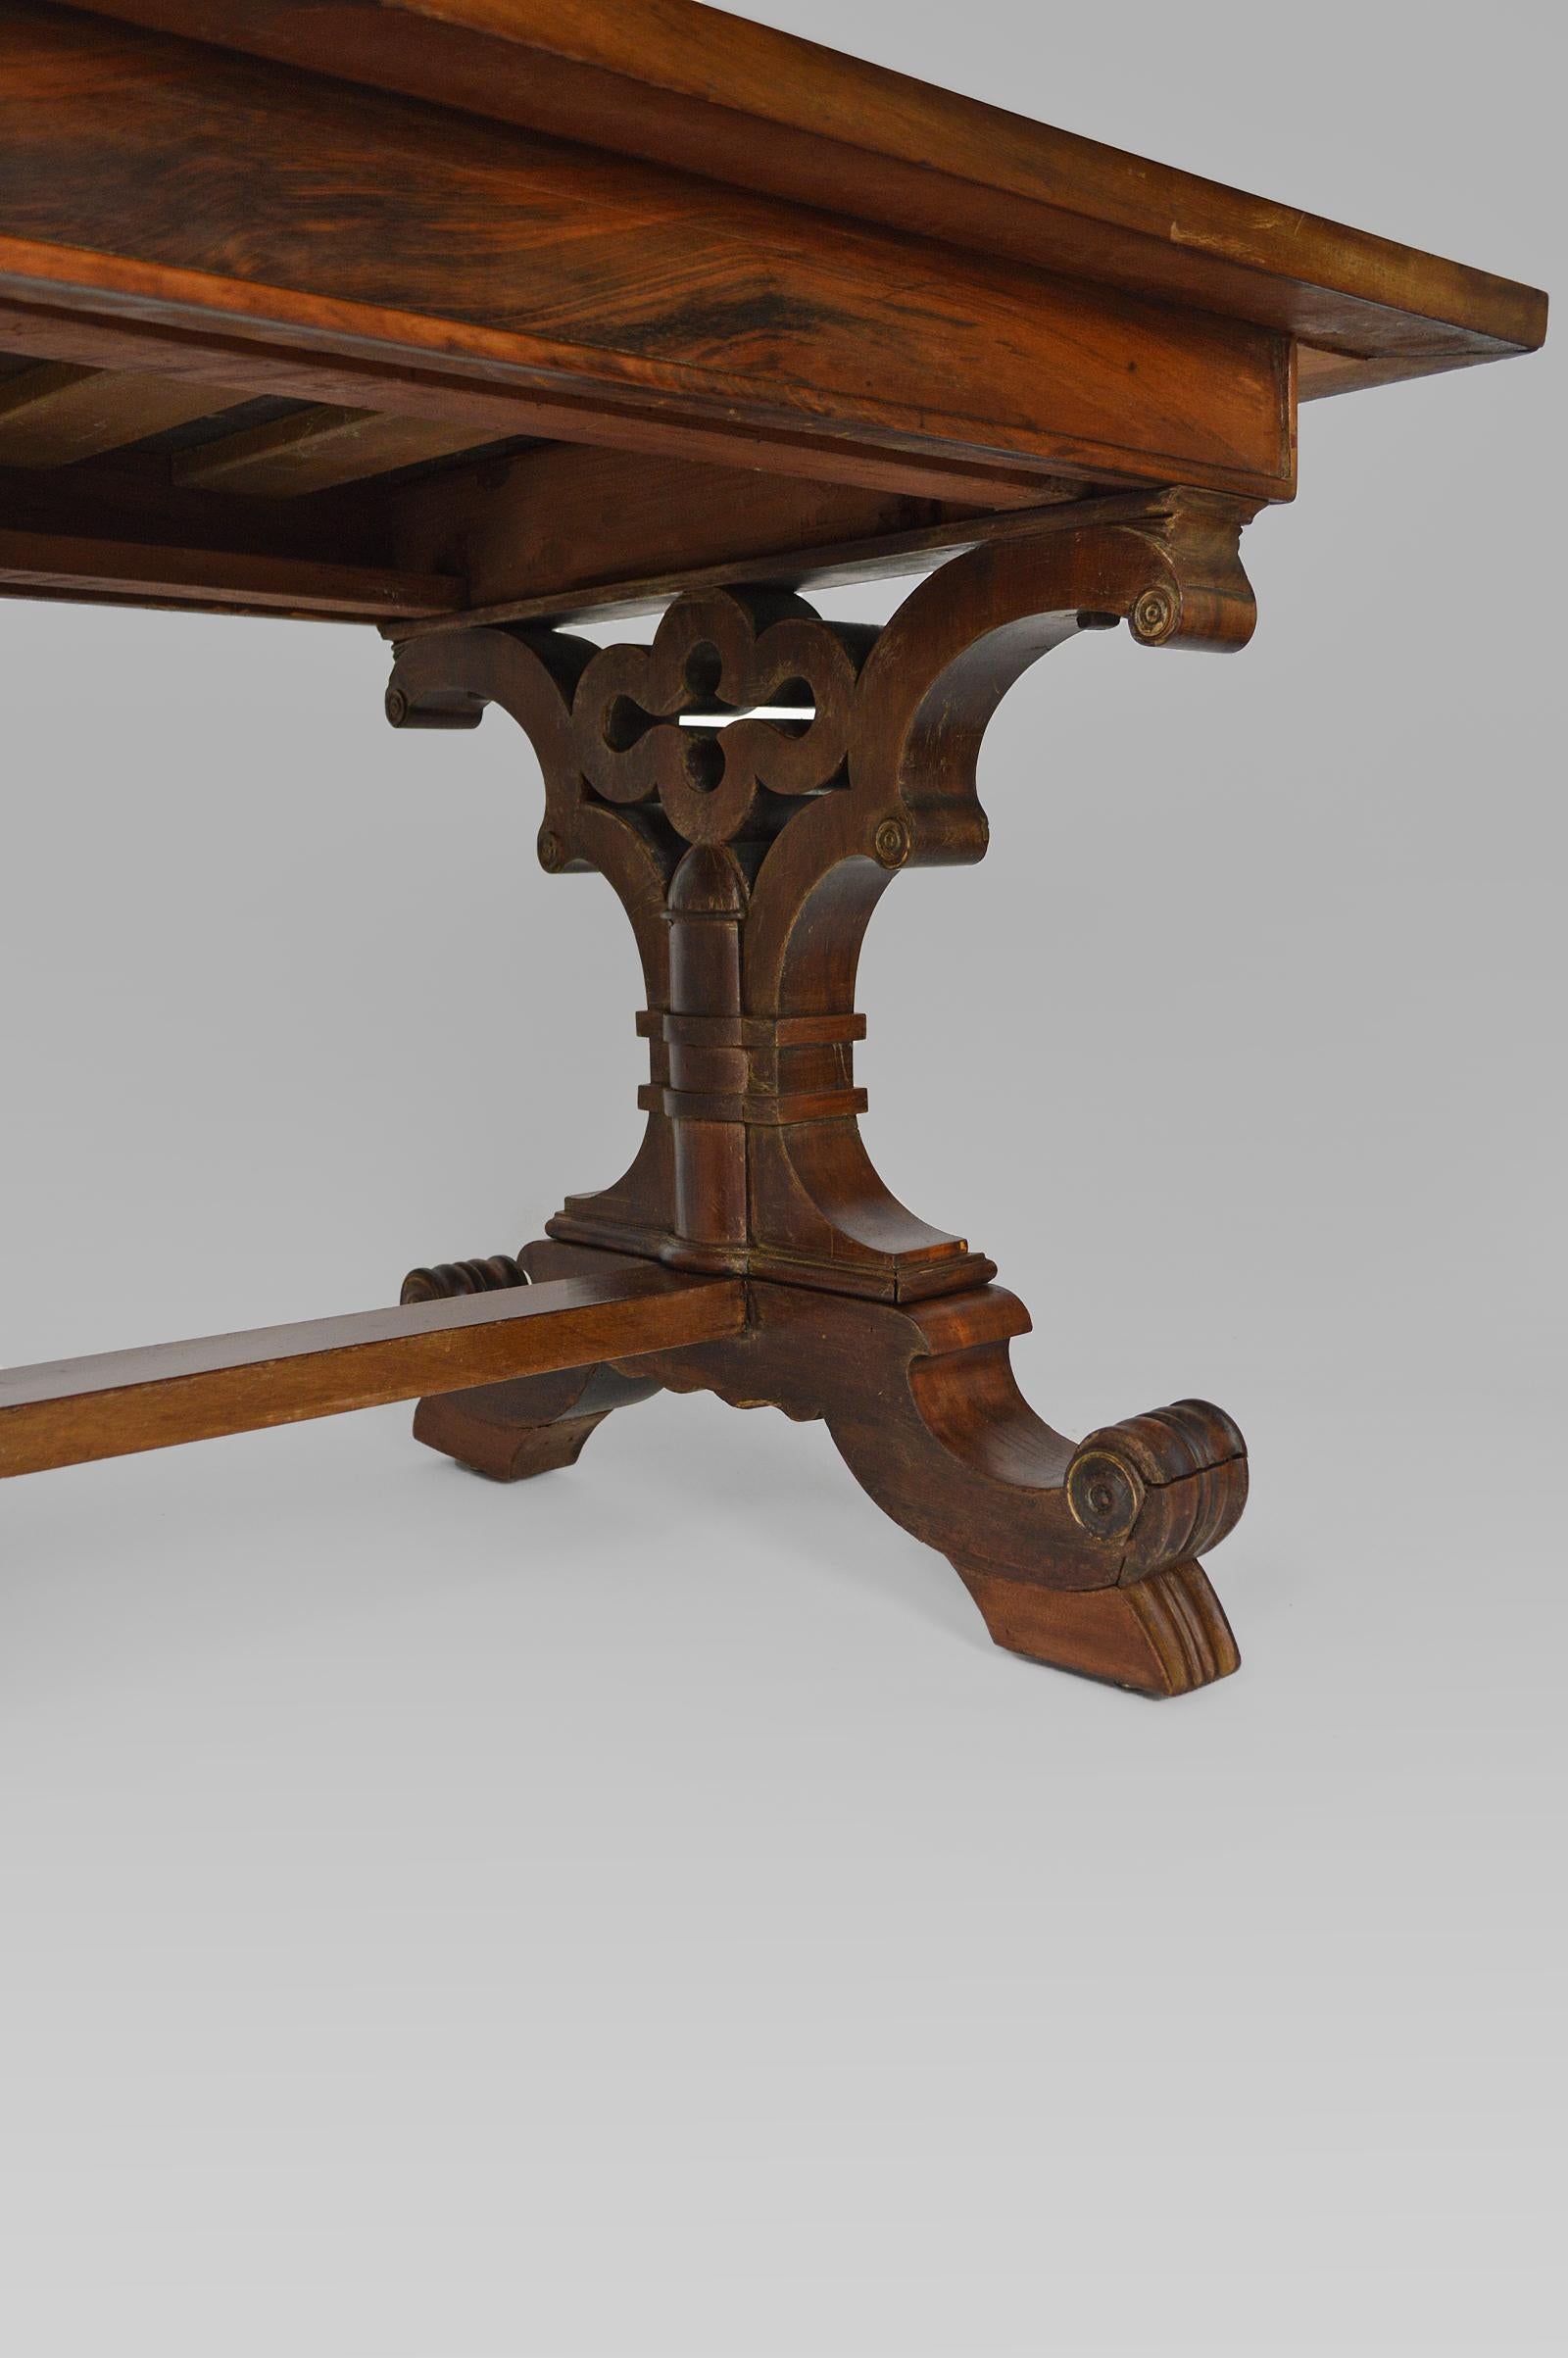 Gothic Revival Dining Table in Mahogany, Victorian Era, circa 1840 For Sale 1